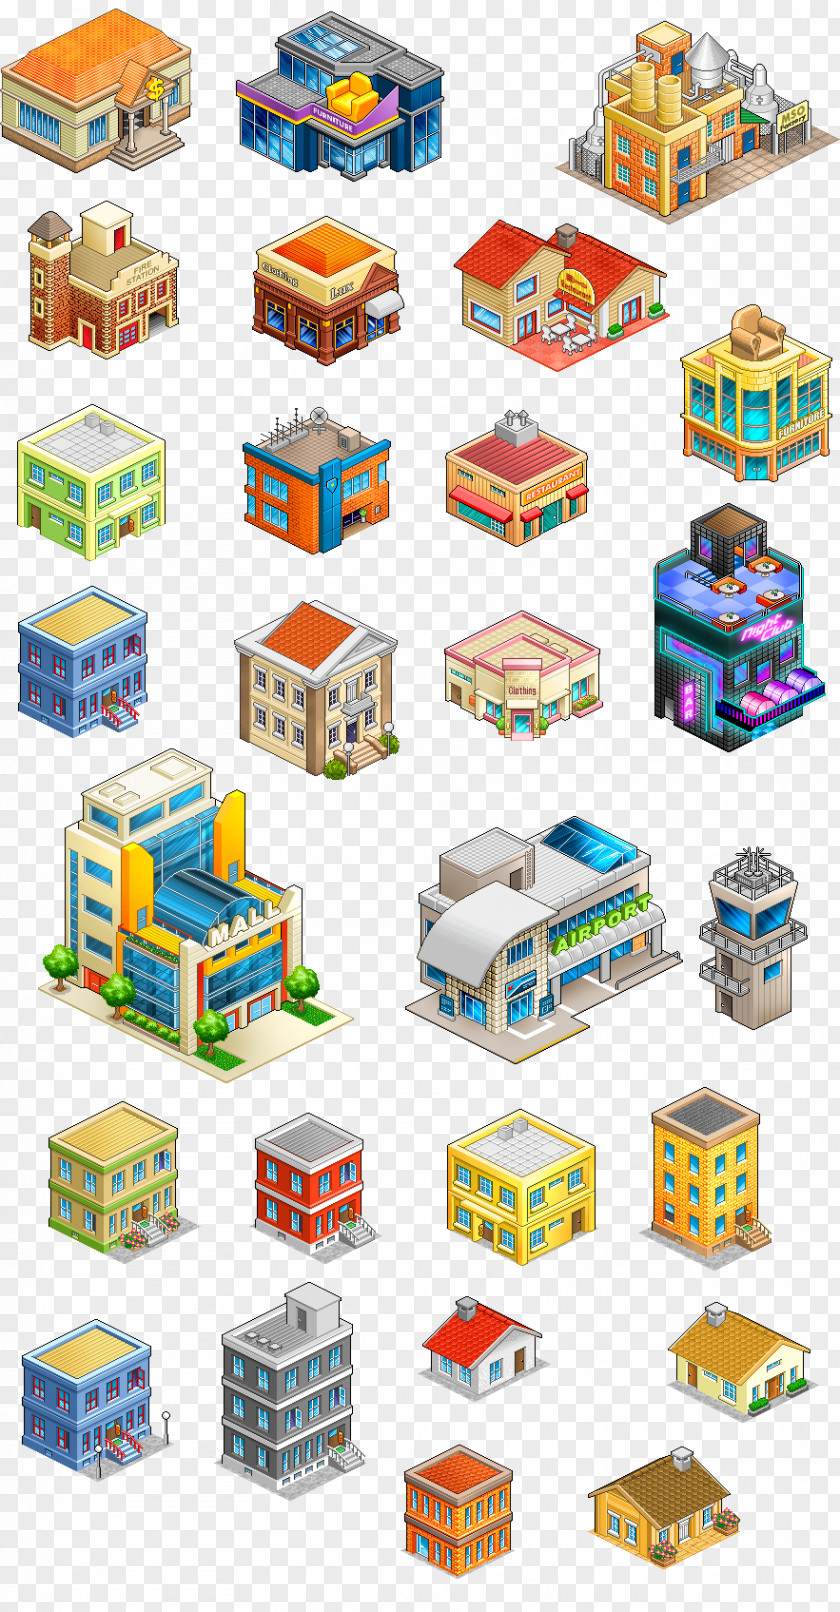 Isometric Building Projection Graphics In Video Games And Pixel Art PNG